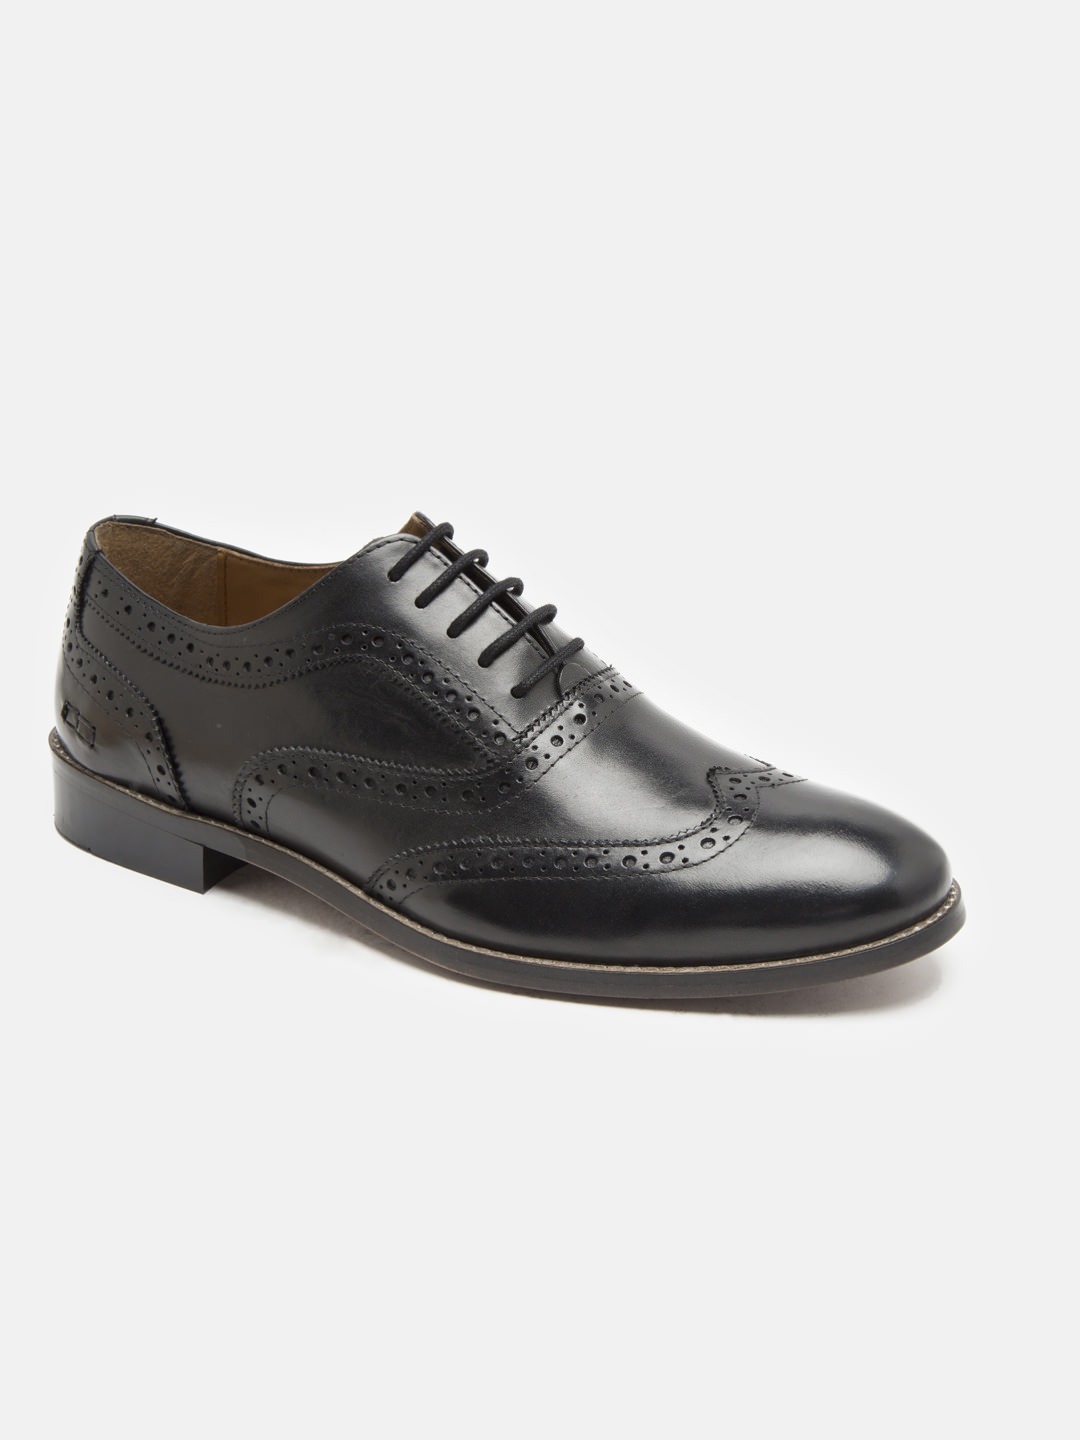 Buy Genuine Leather Black Brogues Shoes by Hats Off Accessories